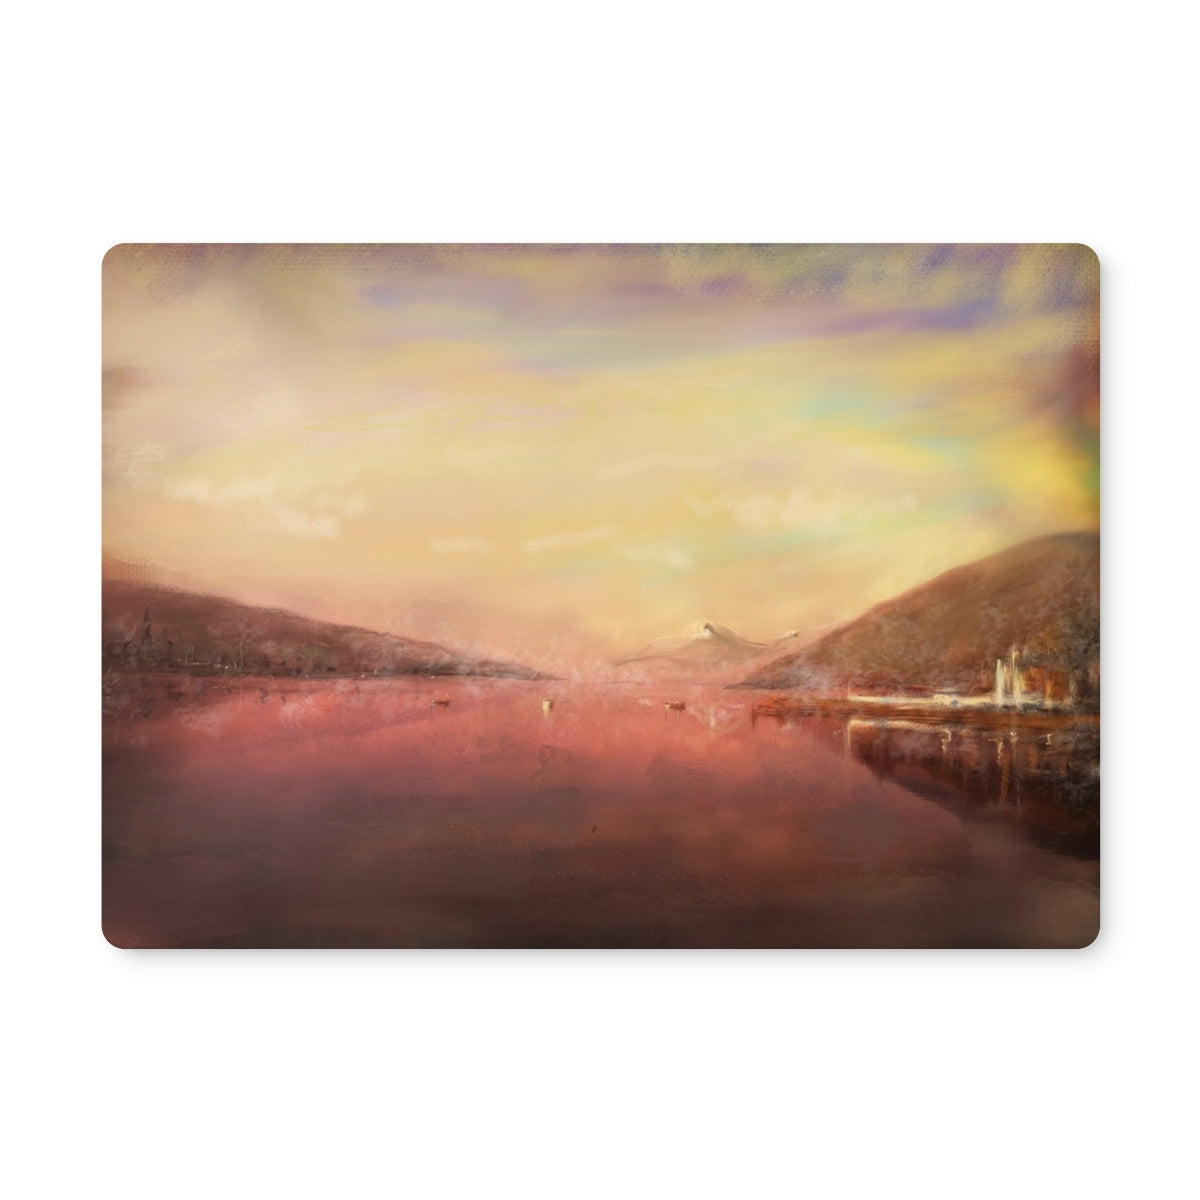 Loch Tay Art Gifts Placemat-Placemats-Scottish Lochs & Mountains Art Gallery-2 Placemats-Paintings, Prints, Homeware, Art Gifts From Scotland By Scottish Artist Kevin Hunter